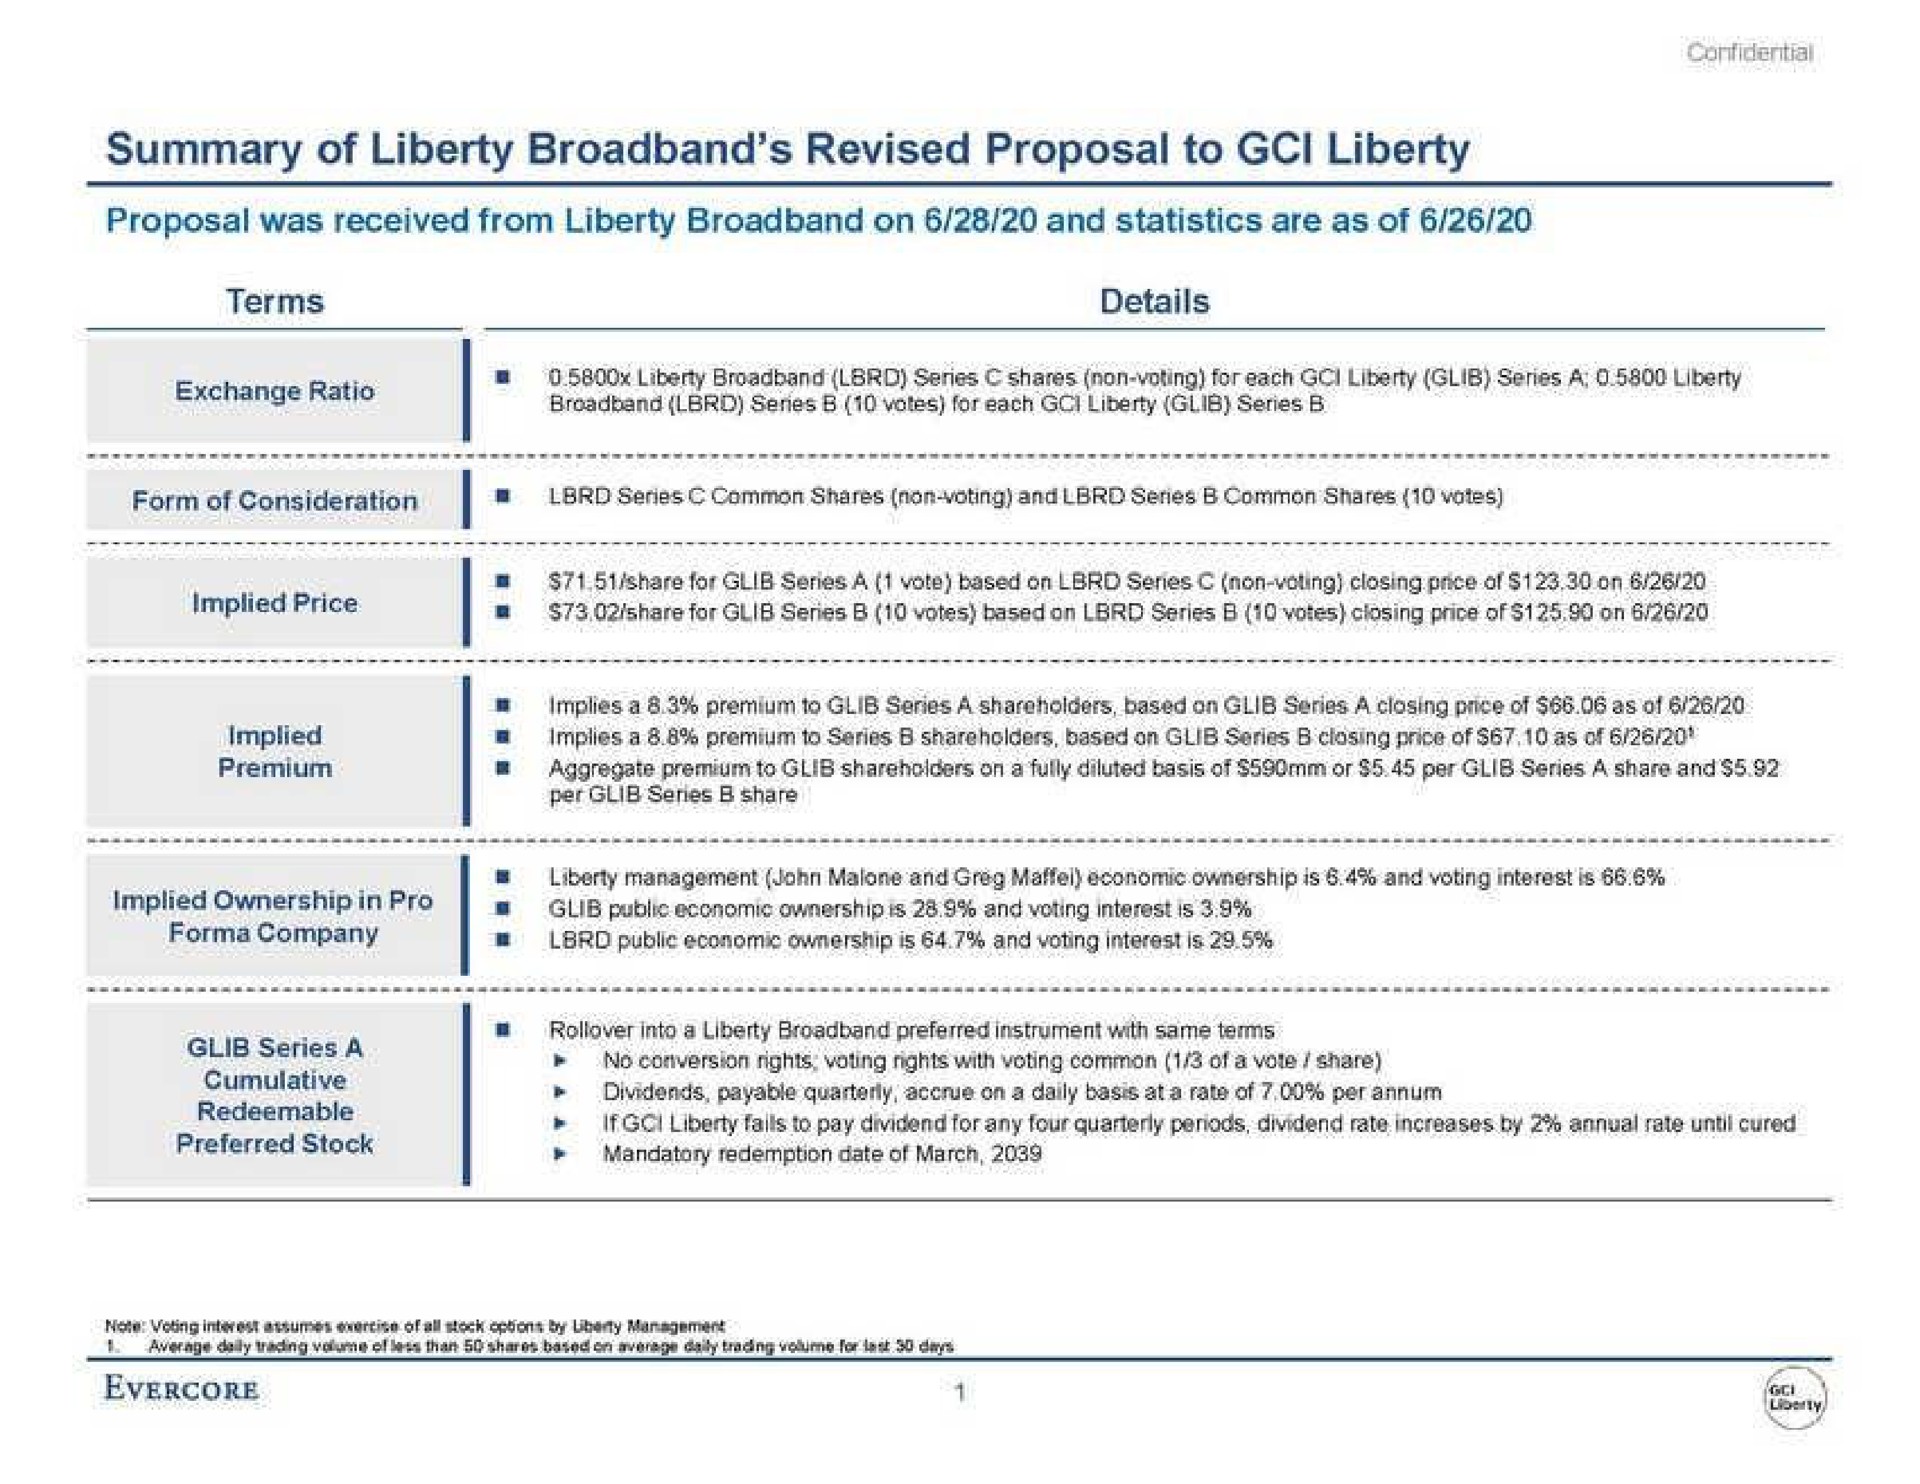 summary of liberty revised proposal to liberty implied price share for glib series votes based on series votes closing price of on implied ownership in pro | Evercore